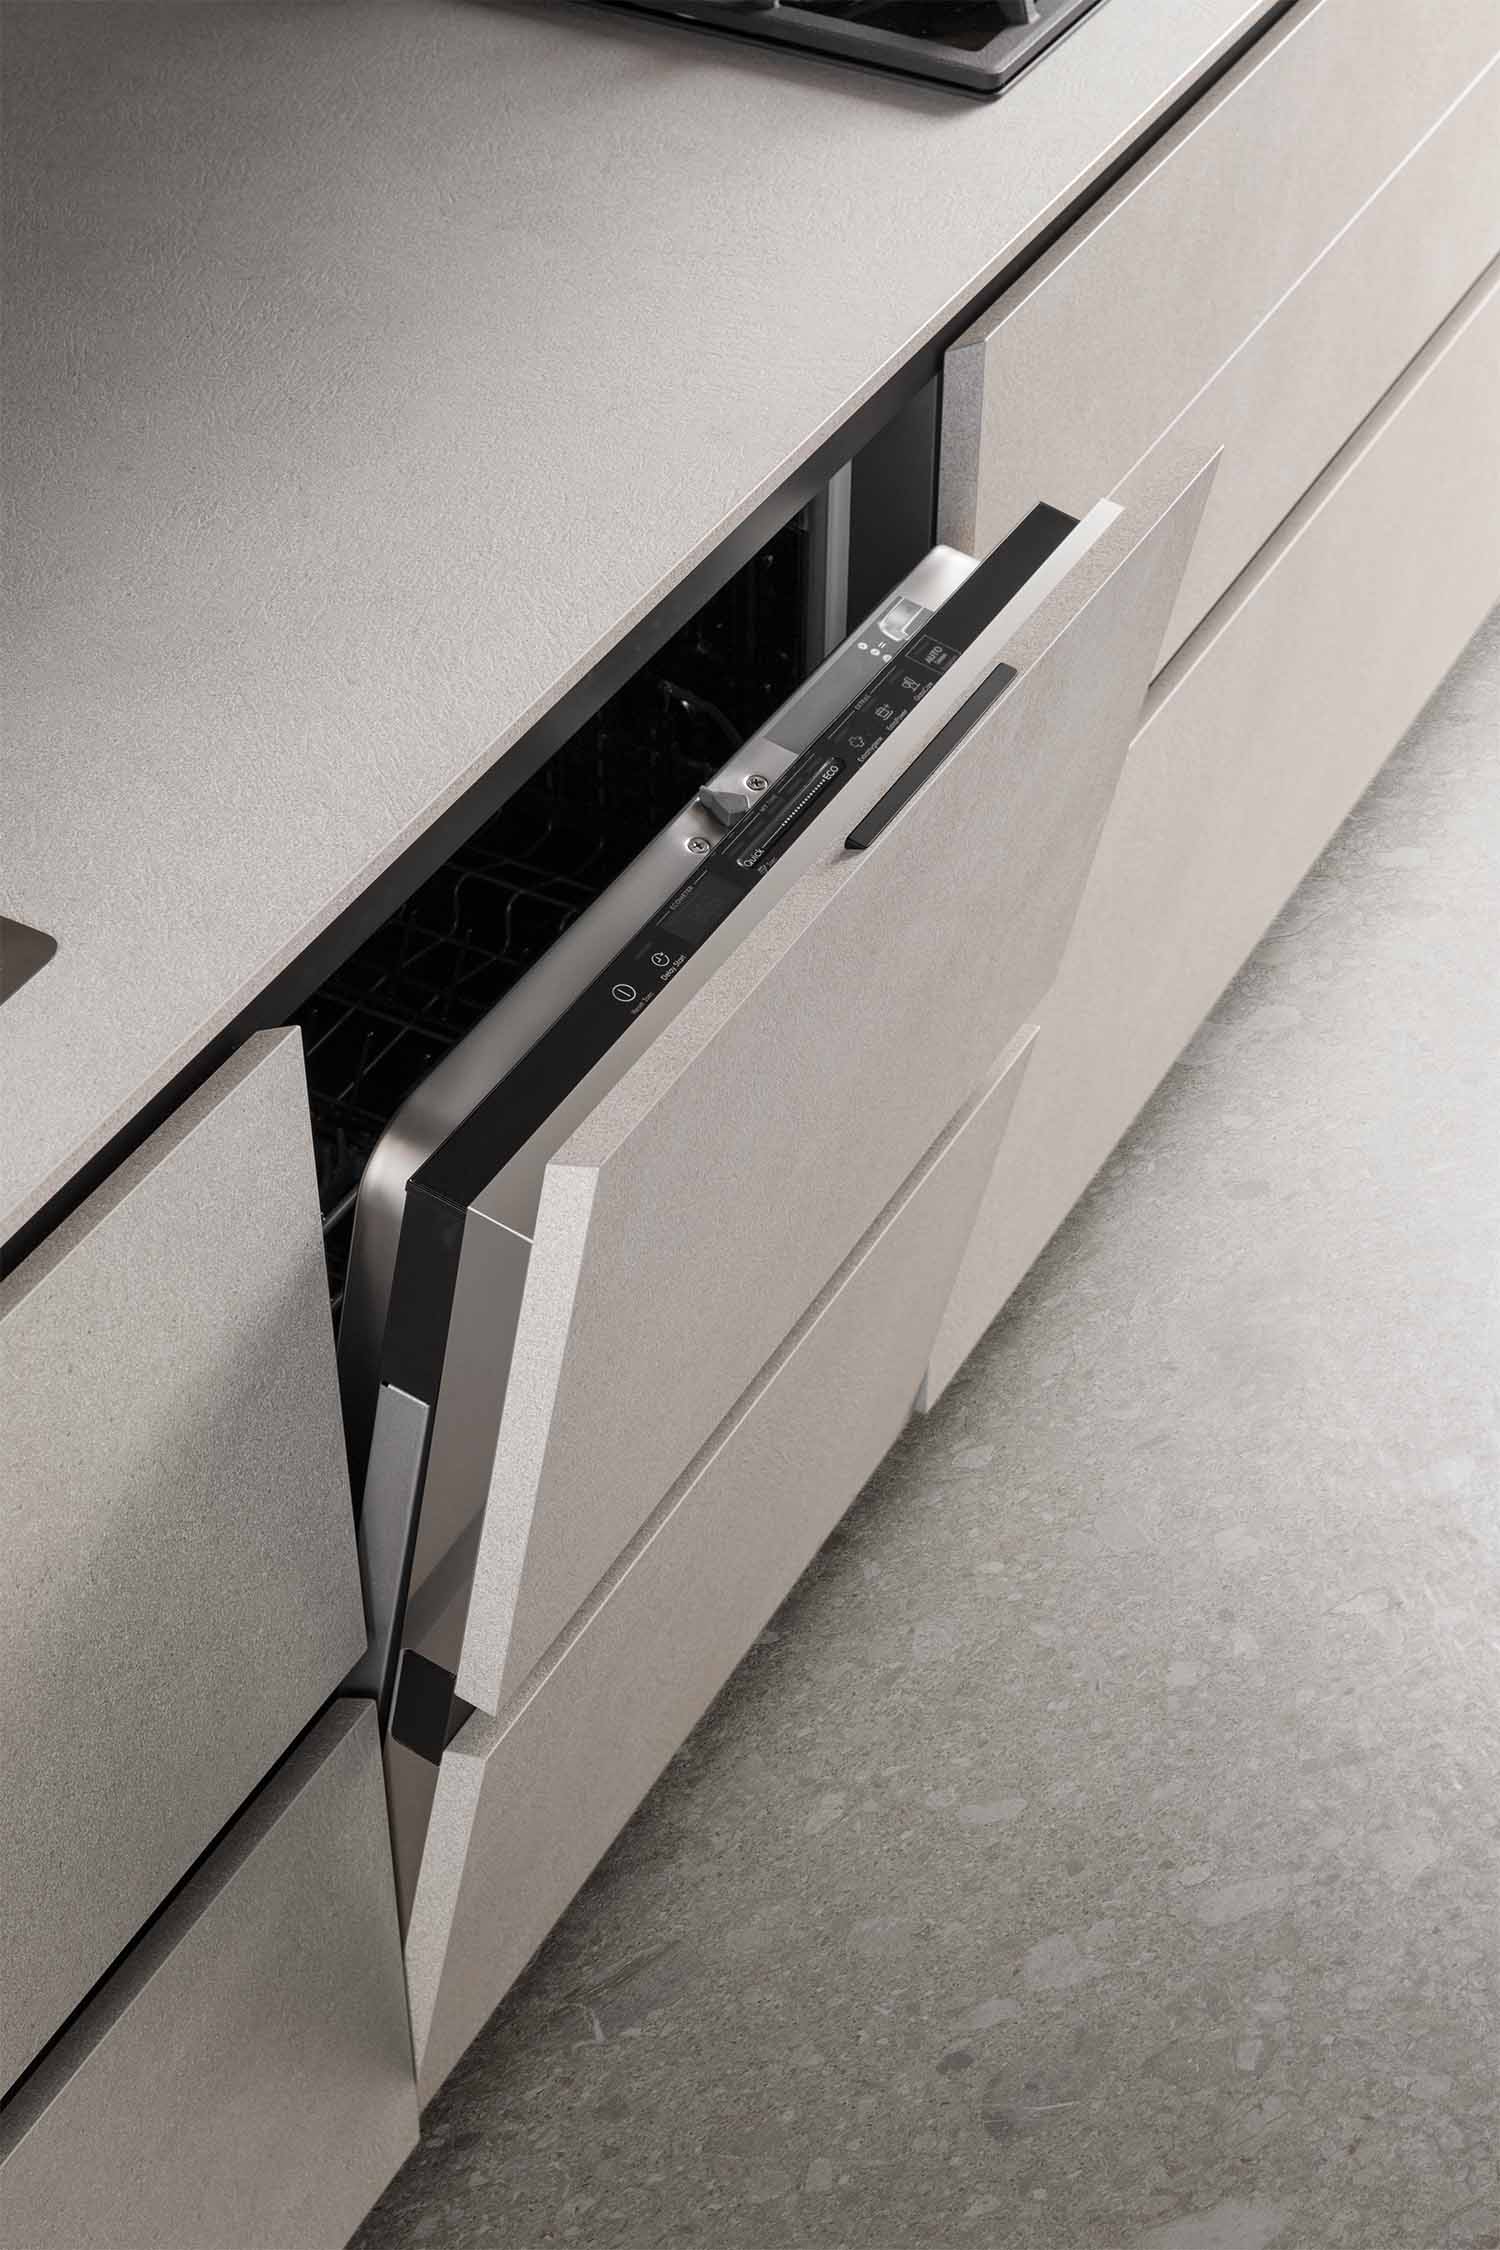 Concealed large appliances are perfectly hidden by the same grooved door design used throughout the kitchen.